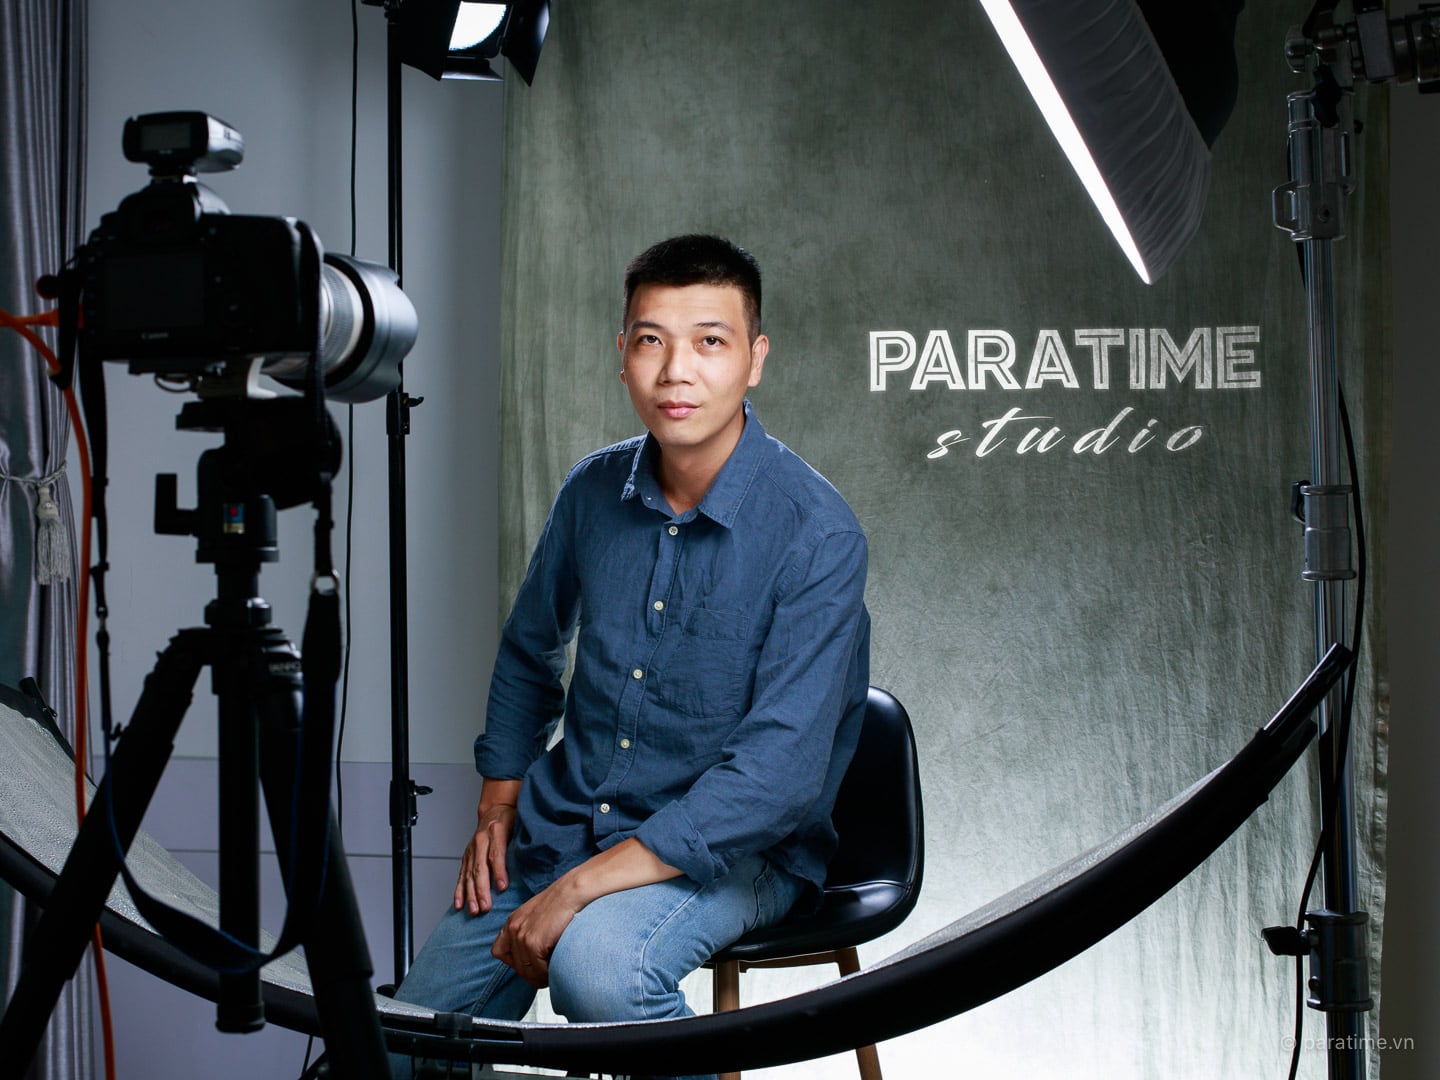 Paratime Studio is the new brand name of TIME Studio